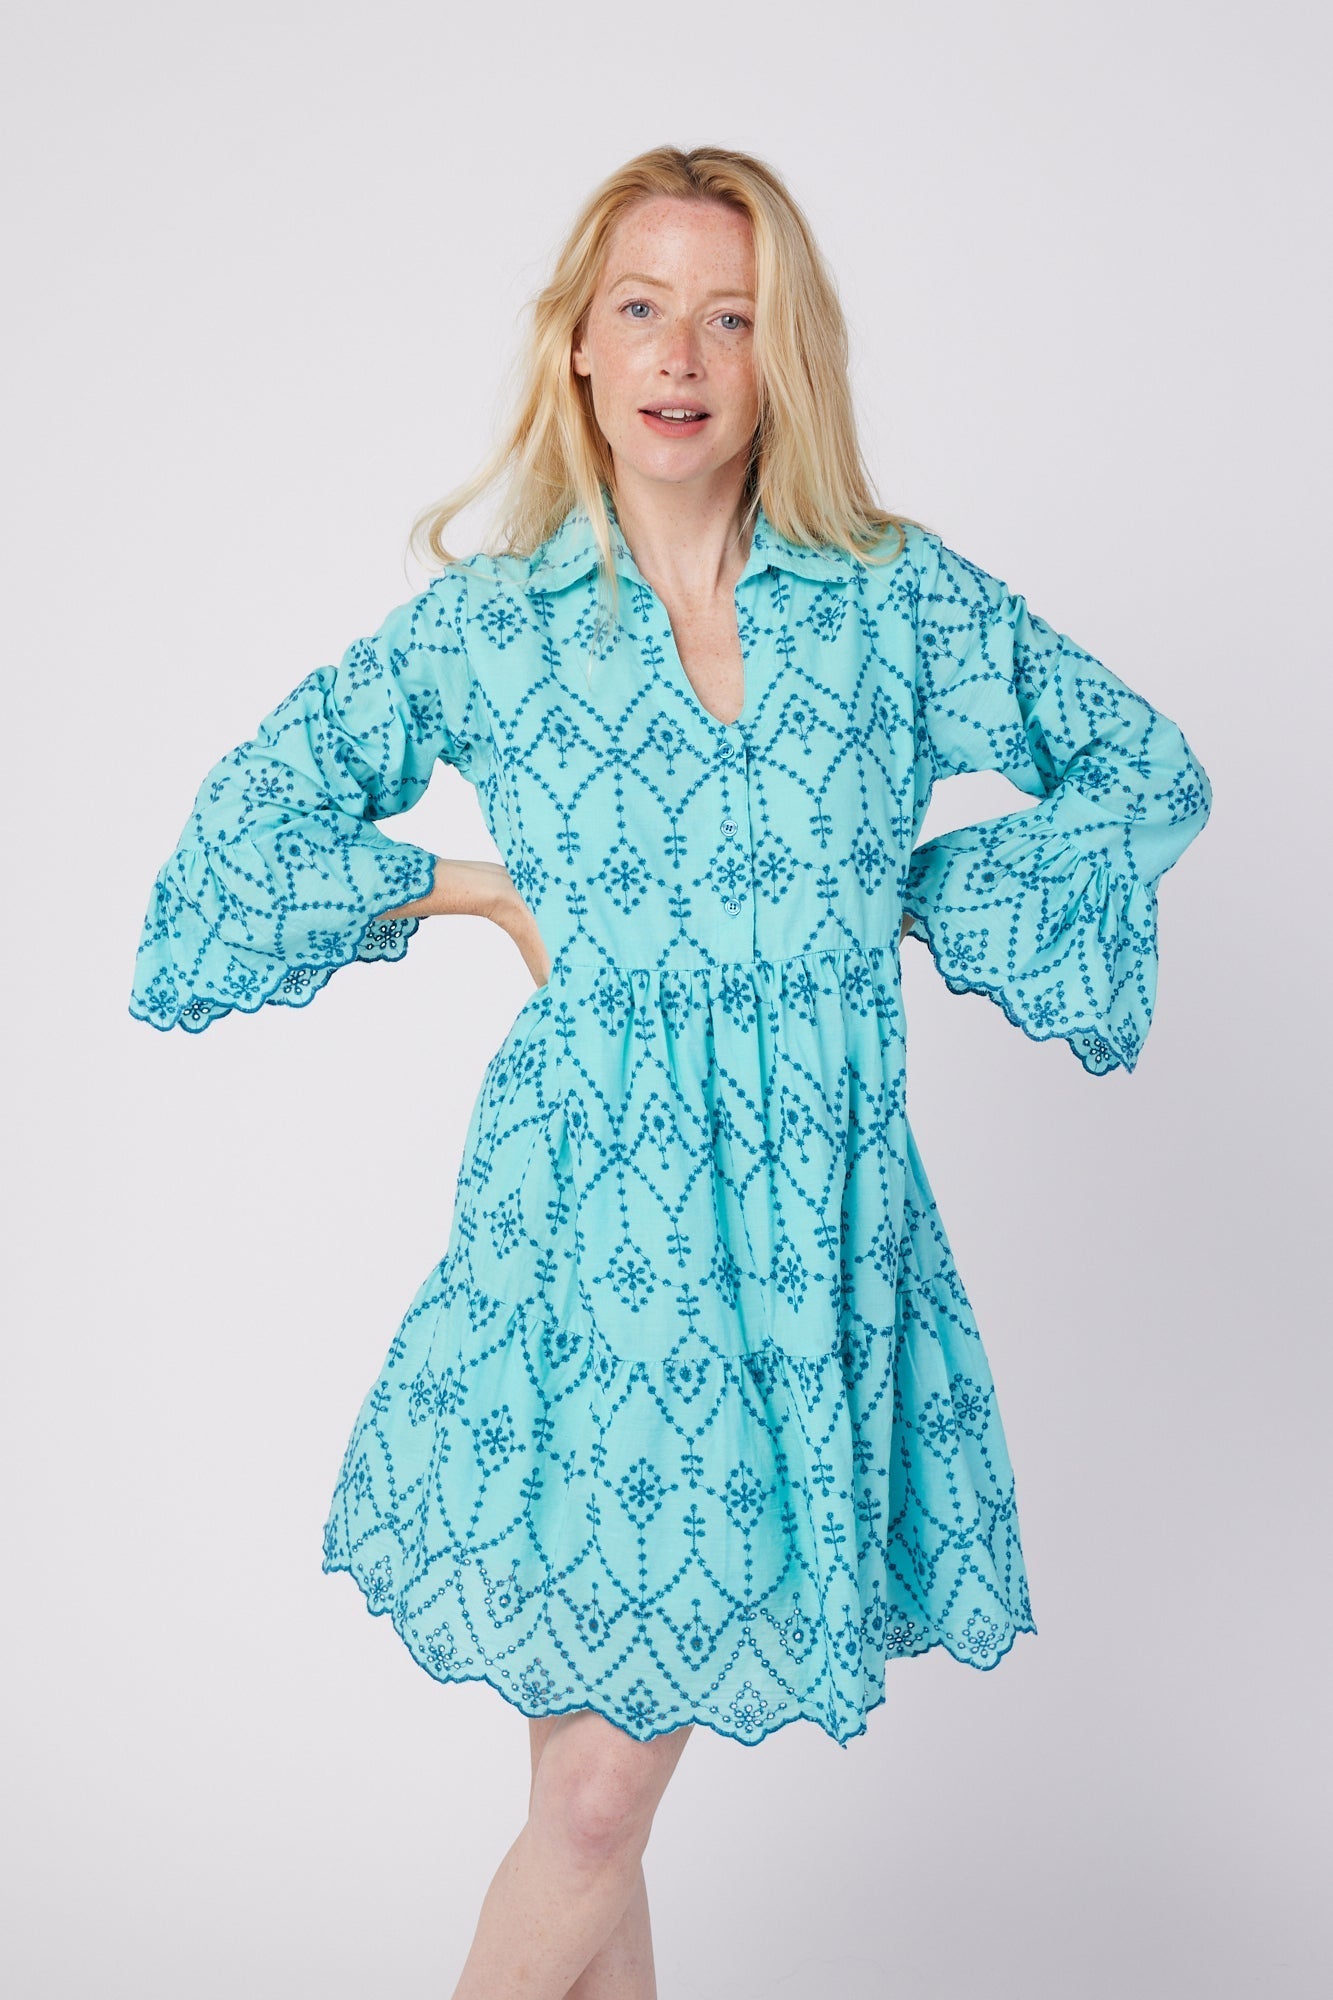 ModaPosa Cadenza 3/4 Frill Sleeve Knee Length Eyelet Dress with Collar in Mykonos Eyelet . Discover women's resort dresses and lifestyle clothing inspired by the Mediterranean. Free worldwide shipping available!